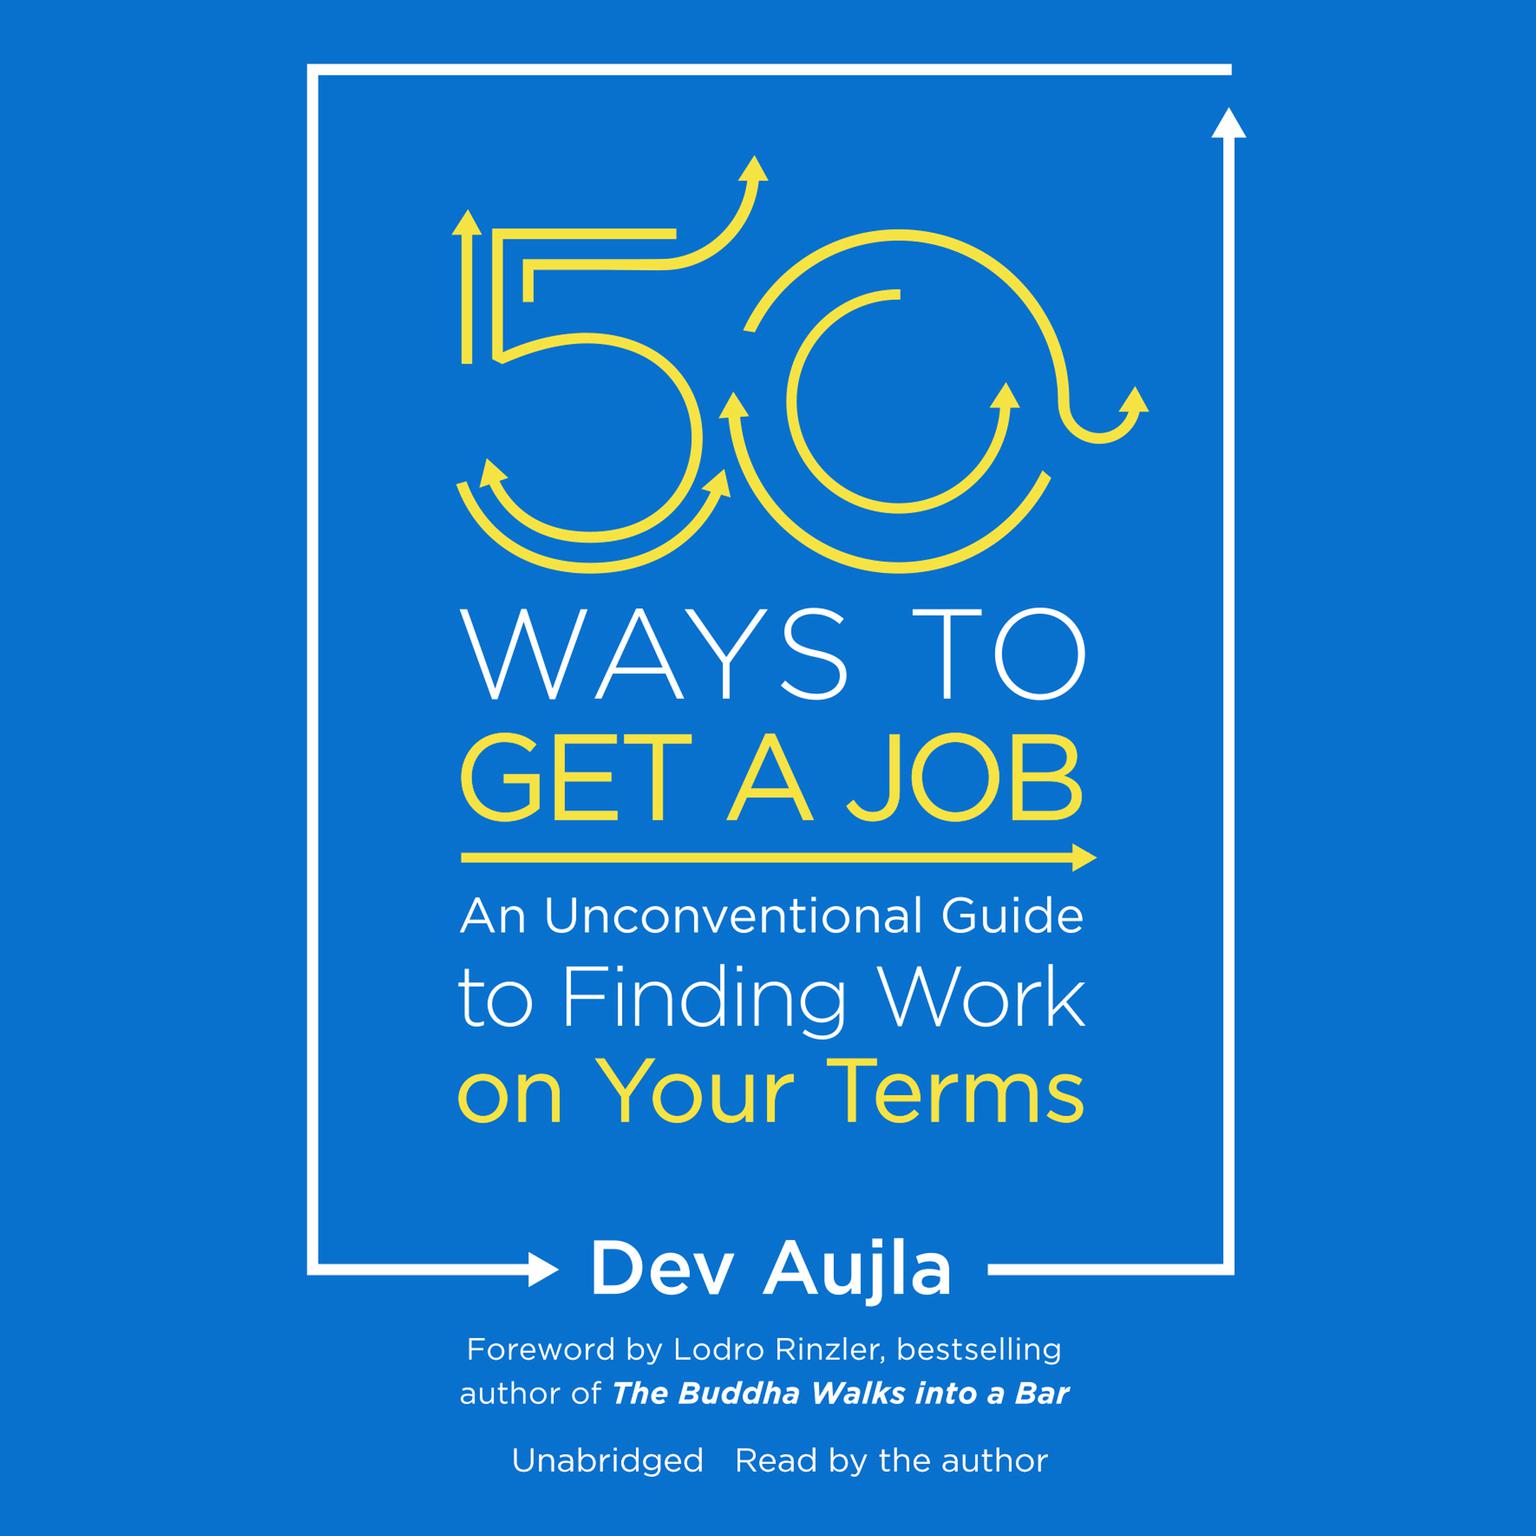 50 Ways to Get a Job: An Unconventional Guide to Finding Work on Your Terms Audiobook, by Dev Aujla